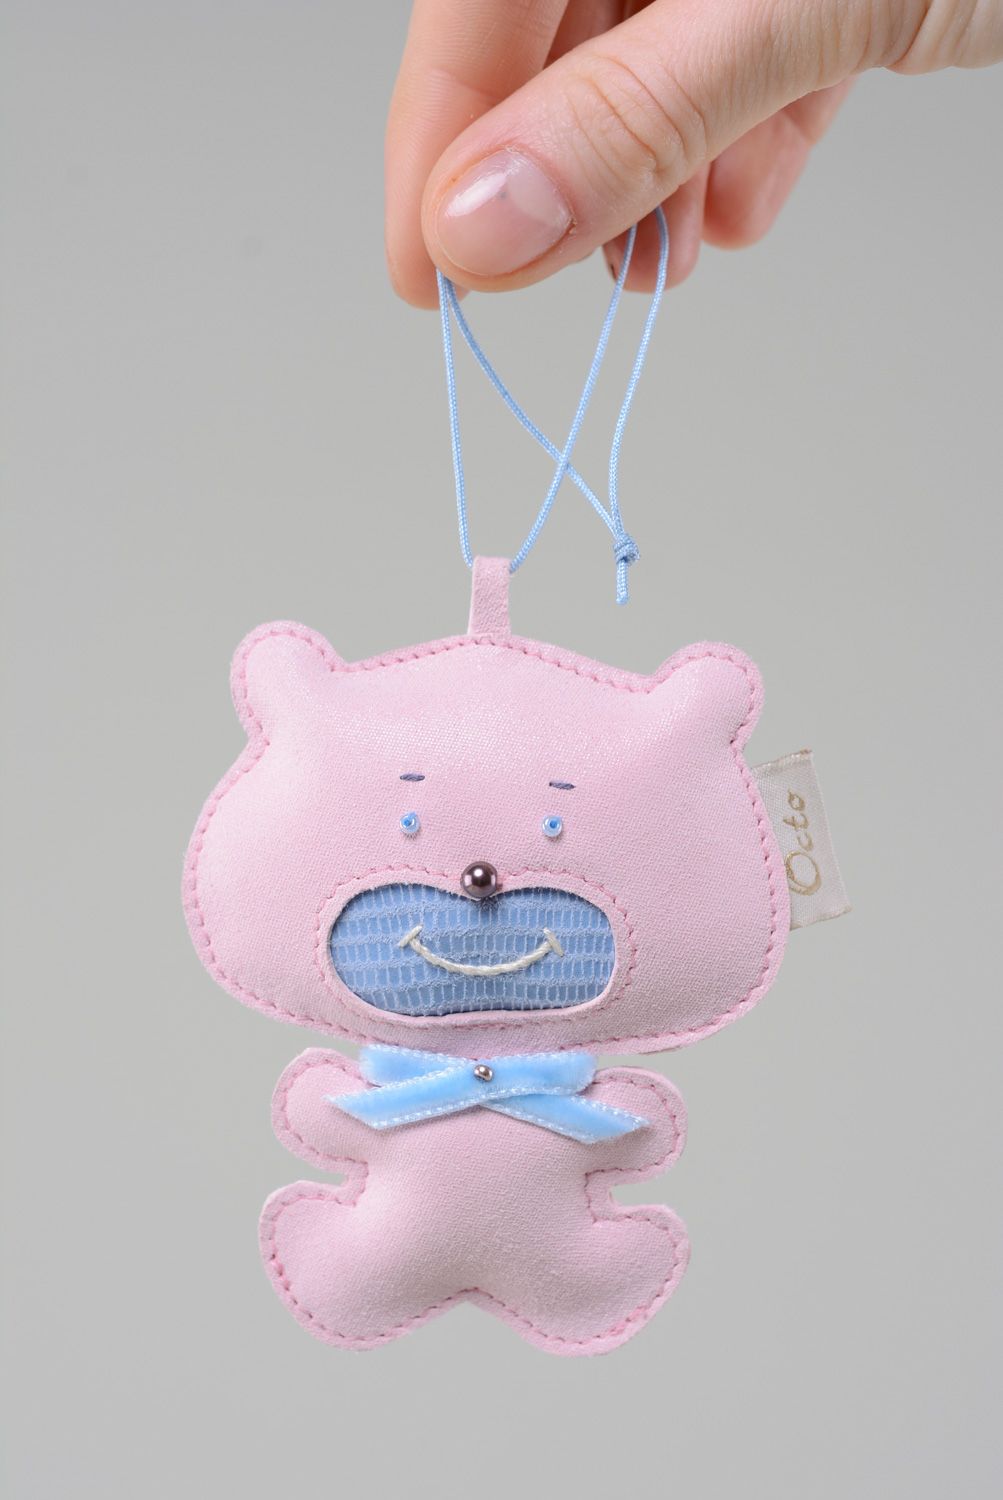 Homemade genuine leather key fob in the shape of cute pink bear charm for bag photo 3